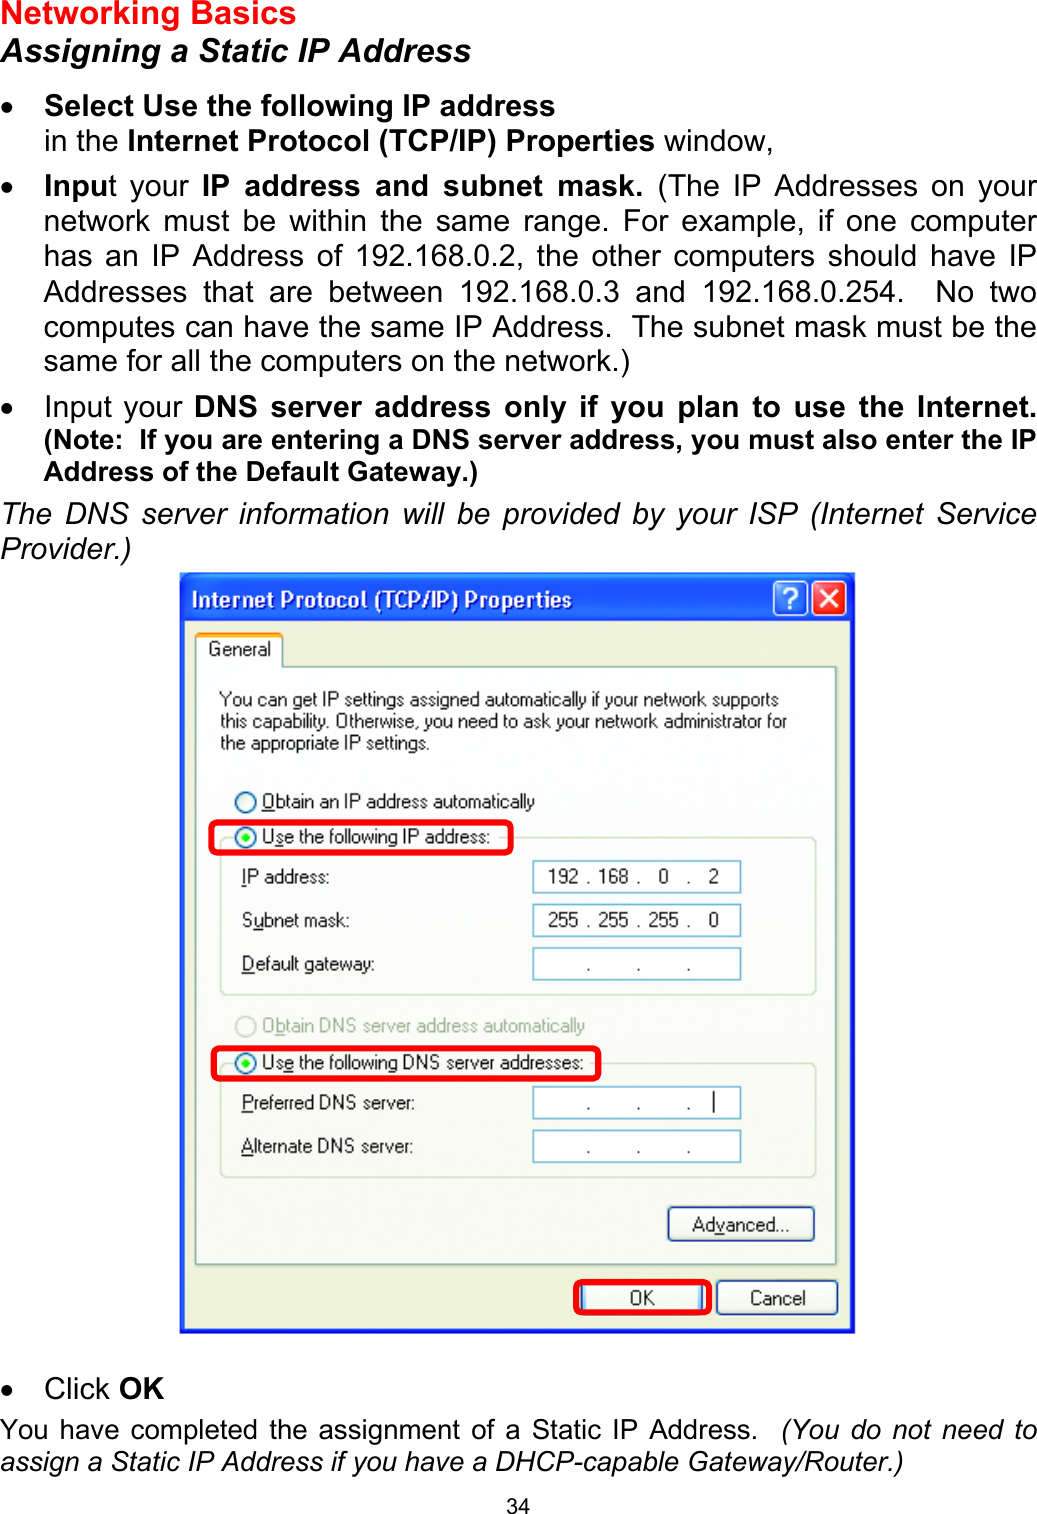  34Networking Basics  Assigning a Static IP Address  •  Select Use the following IP address   in the Internet Protocol (TCP/IP) Properties window,  •  Input your IP address and subnet mask. (The IP Addresses on your network must be within the same range. For example, if one computer has an IP Address of 192.168.0.2, the other computers should have IP Addresses that are between 192.168.0.3 and 192.168.0.254.  No two computes can have the same IP Address.  The subnet mask must be the same for all the computers on the network.) •  Input your DNS server address only if you plan to use the Internet.  (Note:  If you are entering a DNS server address, you must also enter the IP Address of the Default Gateway.)  The DNS server information will be provided by your ISP (Internet Service Provider.)   •  Click OK You have completed the assignment of a Static IP Address.  (You do not need to assign a Static IP Address if you have a DHCP-capable Gateway/Router.)  